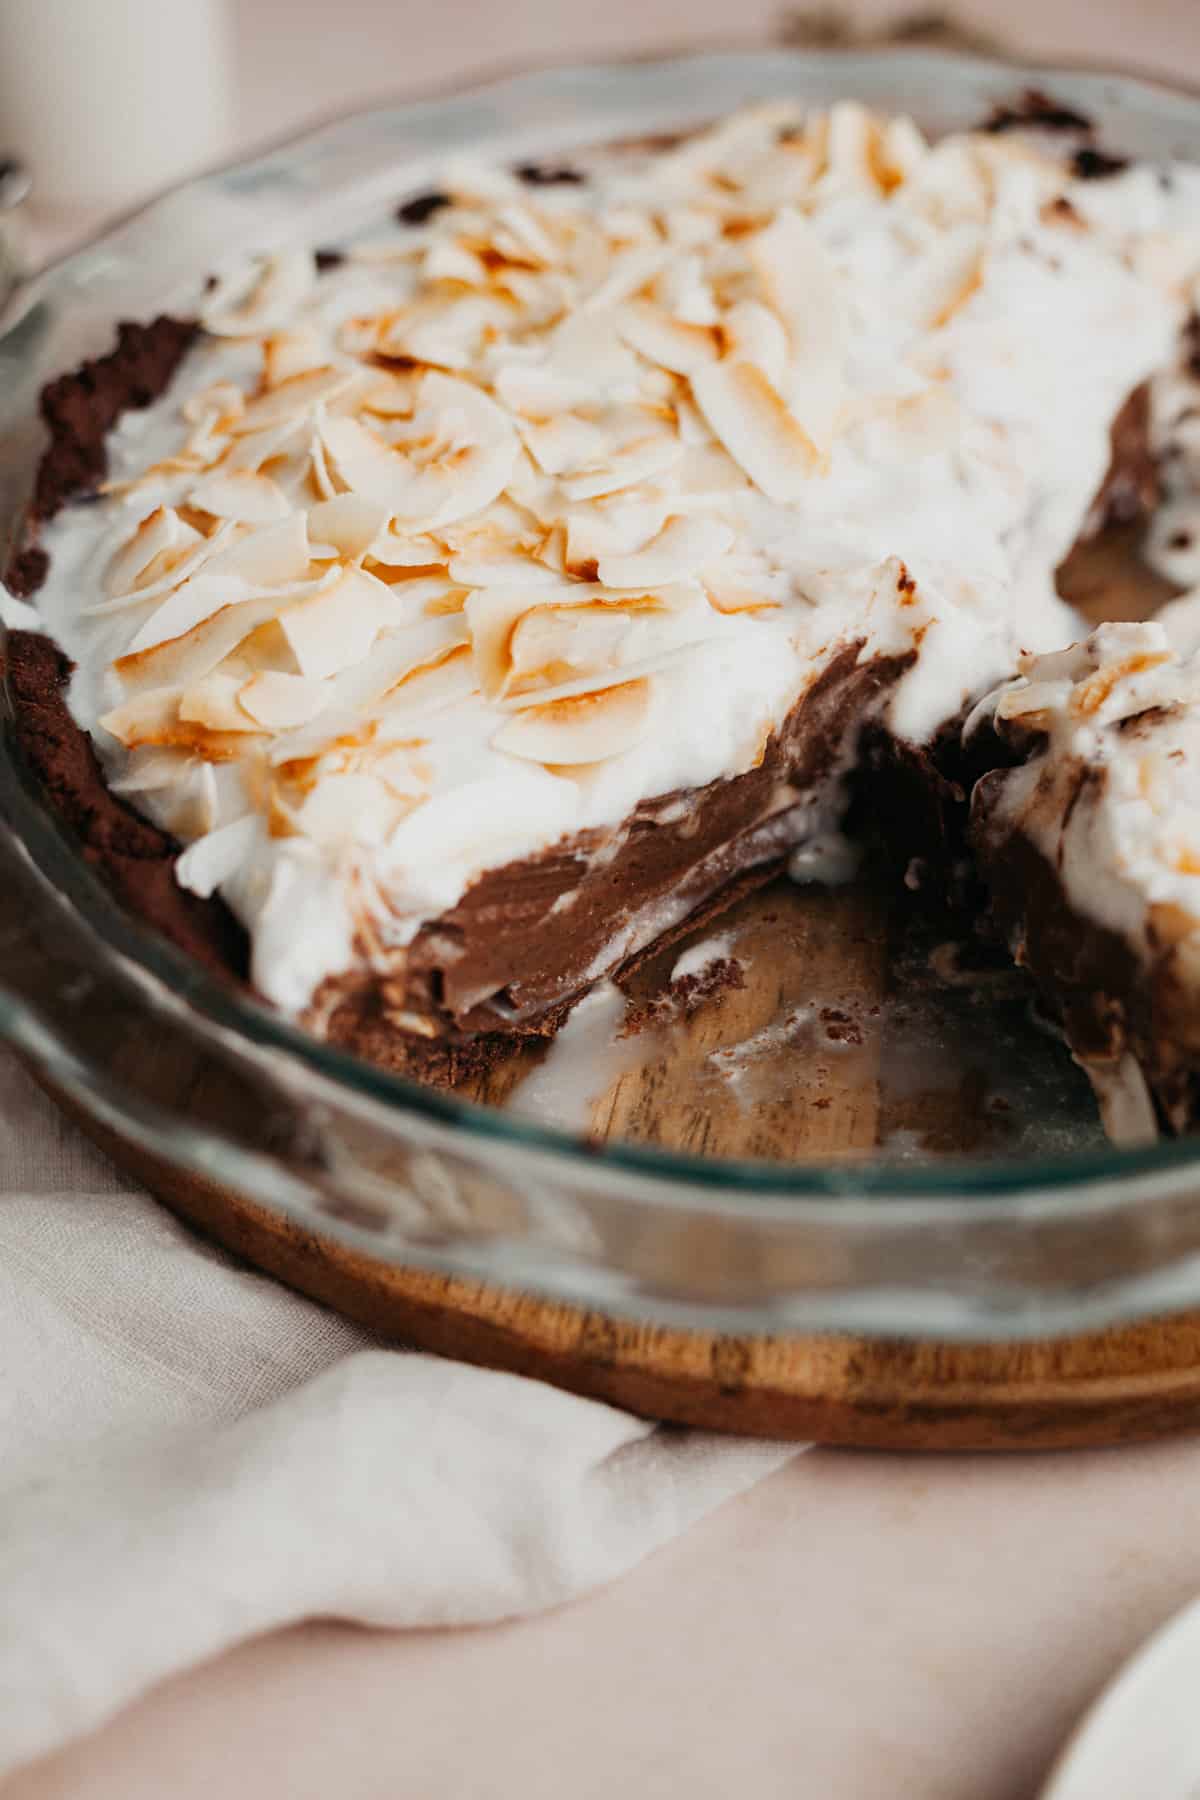 A chocolate pie topped with whipped cream and toasted coconut in a pyrex pie plate. A few slices have been taken out